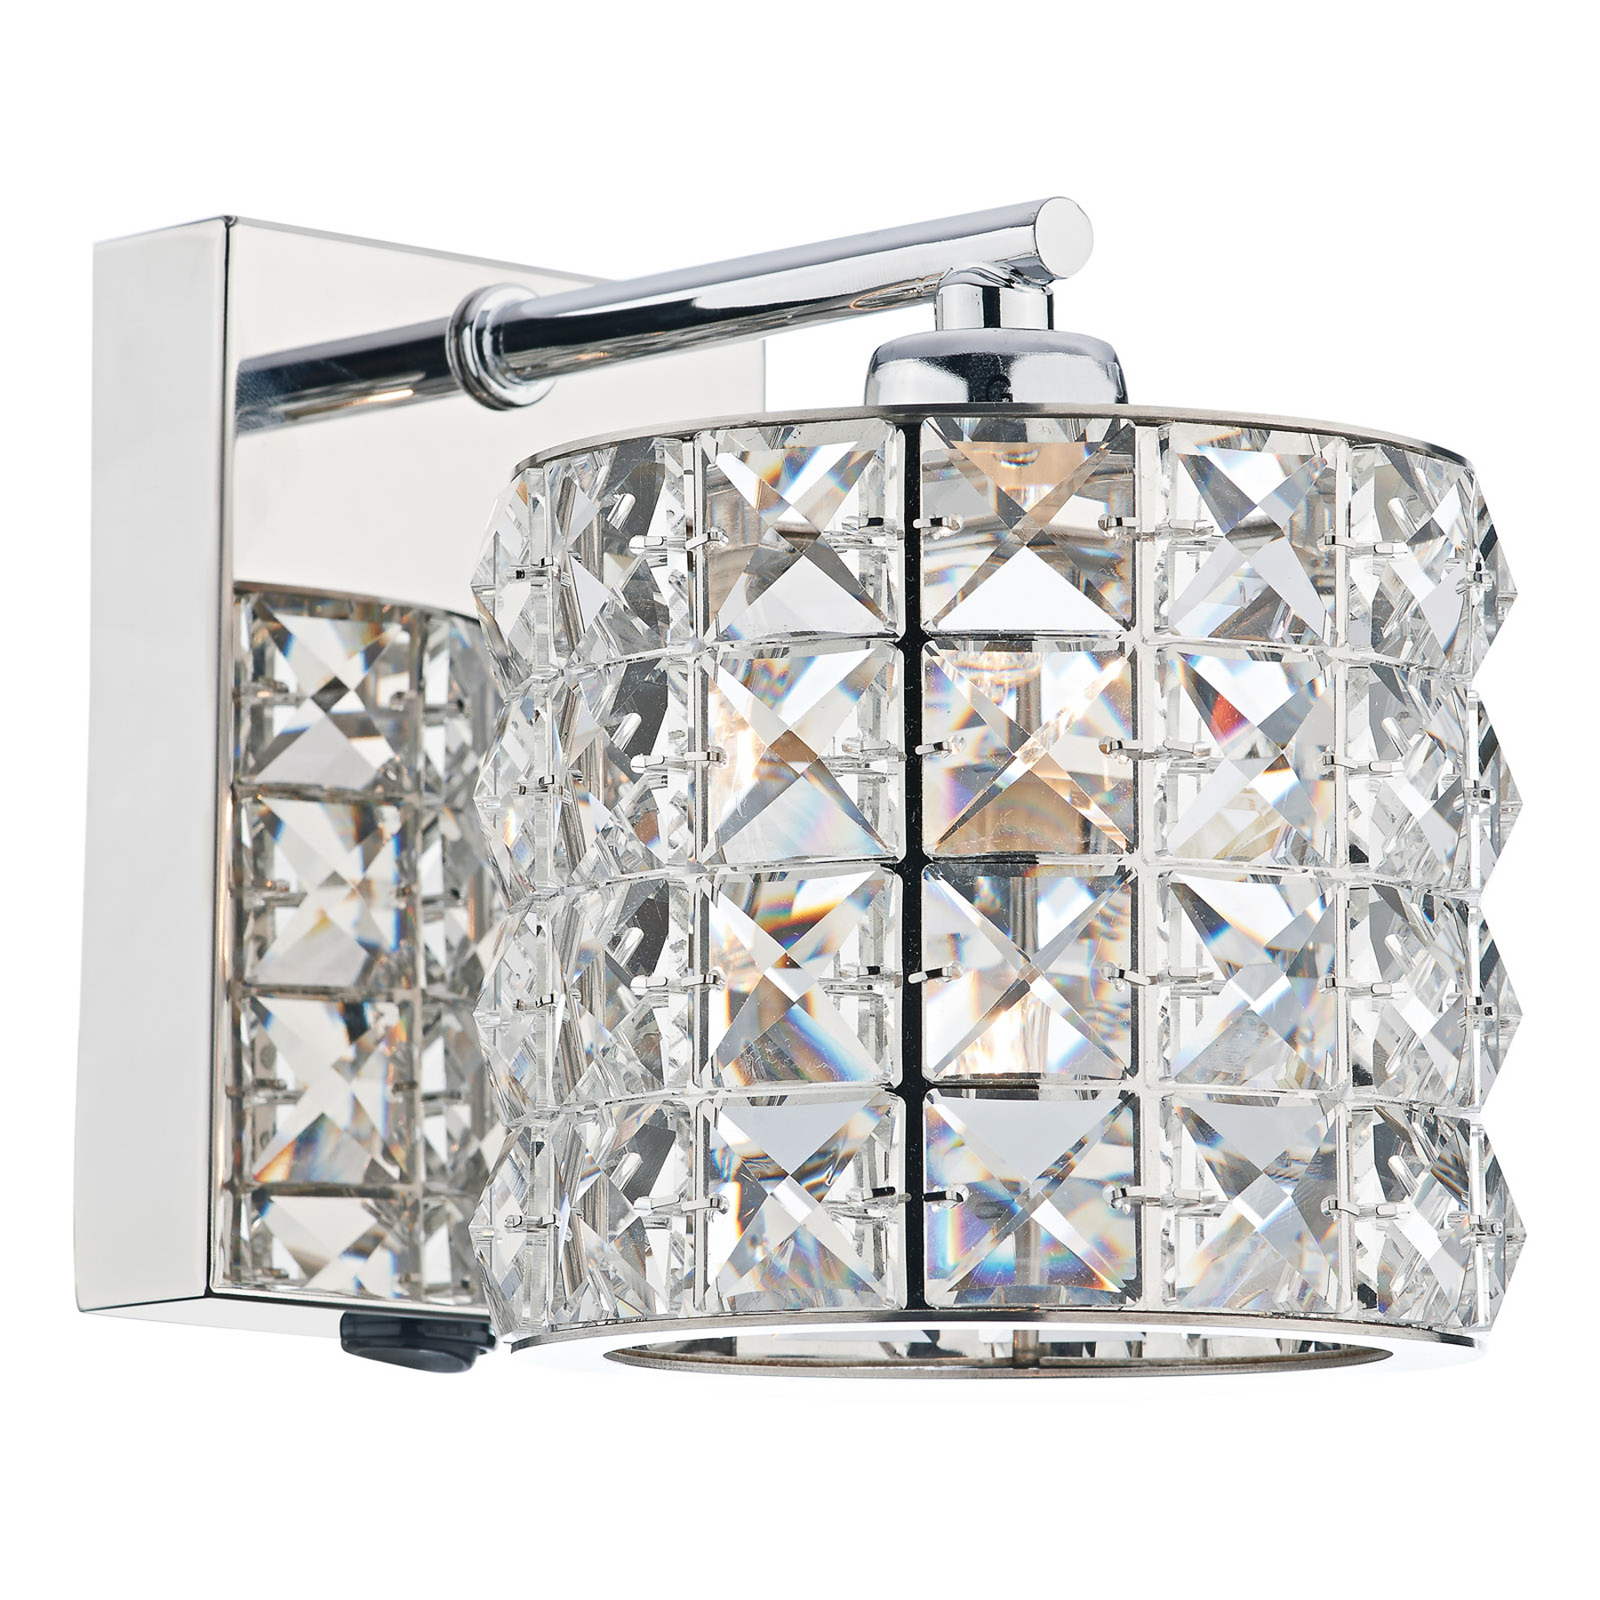 Agneta wall light, crystal lampshade and switch